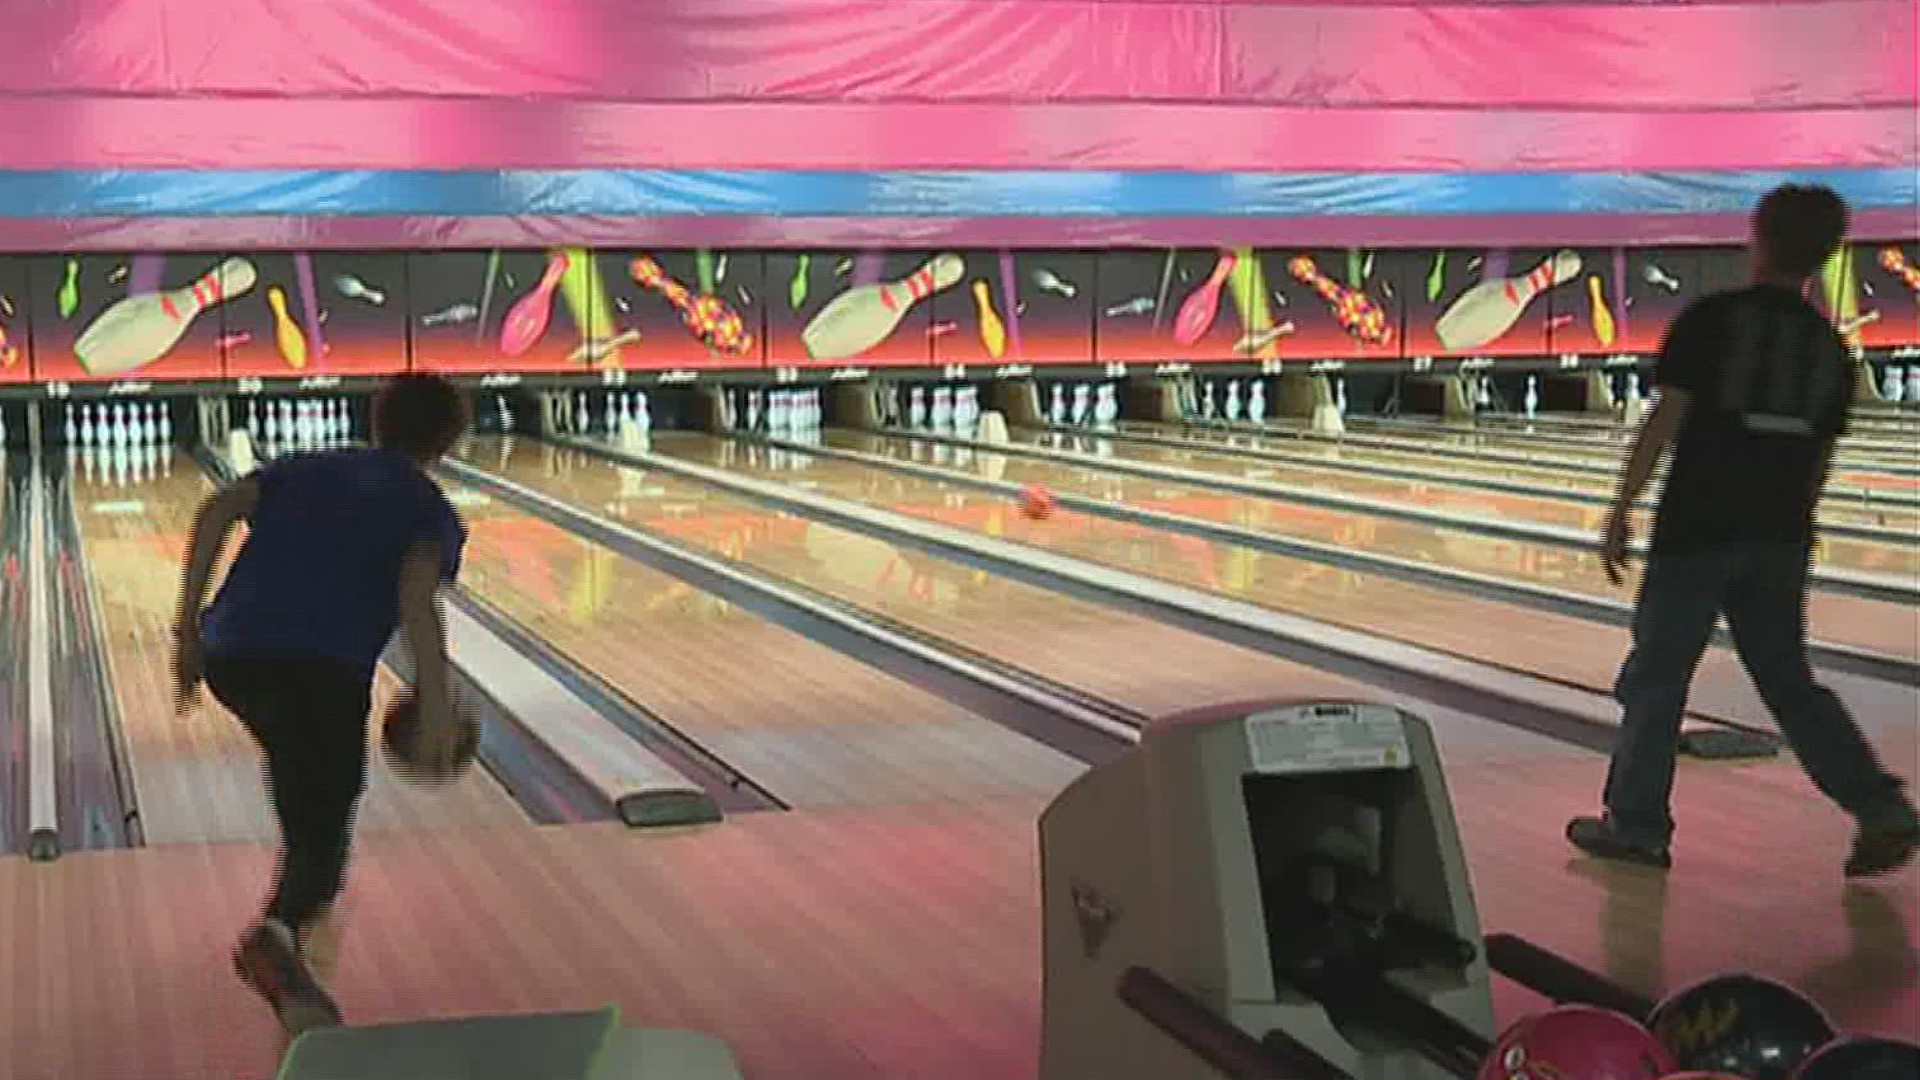 People were out bowling for a cause Sunday in Wilkes-Barre. Chako's Family Bowling Center hosted the Northeast PA Strike Out Epilepsy Bowl-A-Thon.